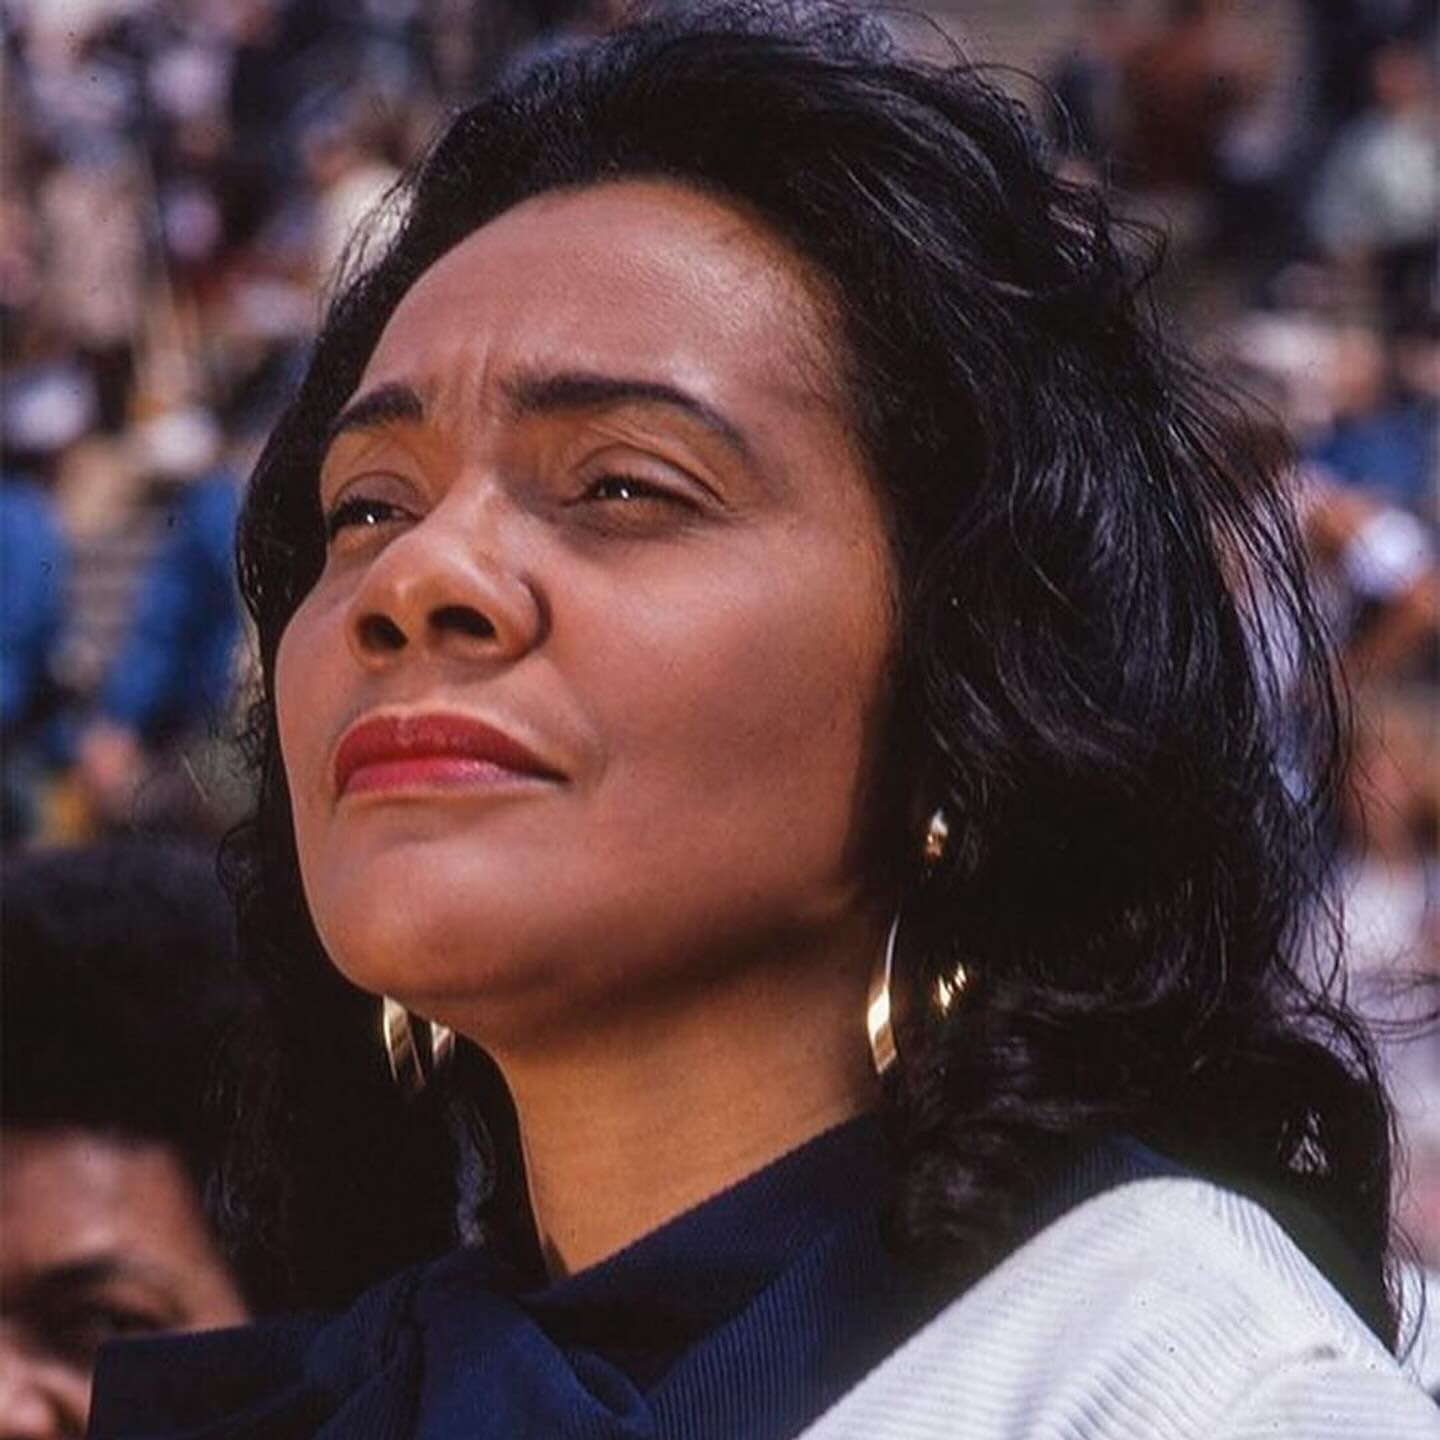 While this day is named for #MLK - it&rsquo;s the partnership that amplified and solidified the impact of the movement. Thank you Coretta Scott King 🖤

Here are a 10 of our favorite Coretta Scott King quotes to consider:

&ldquo;The greatness of a c